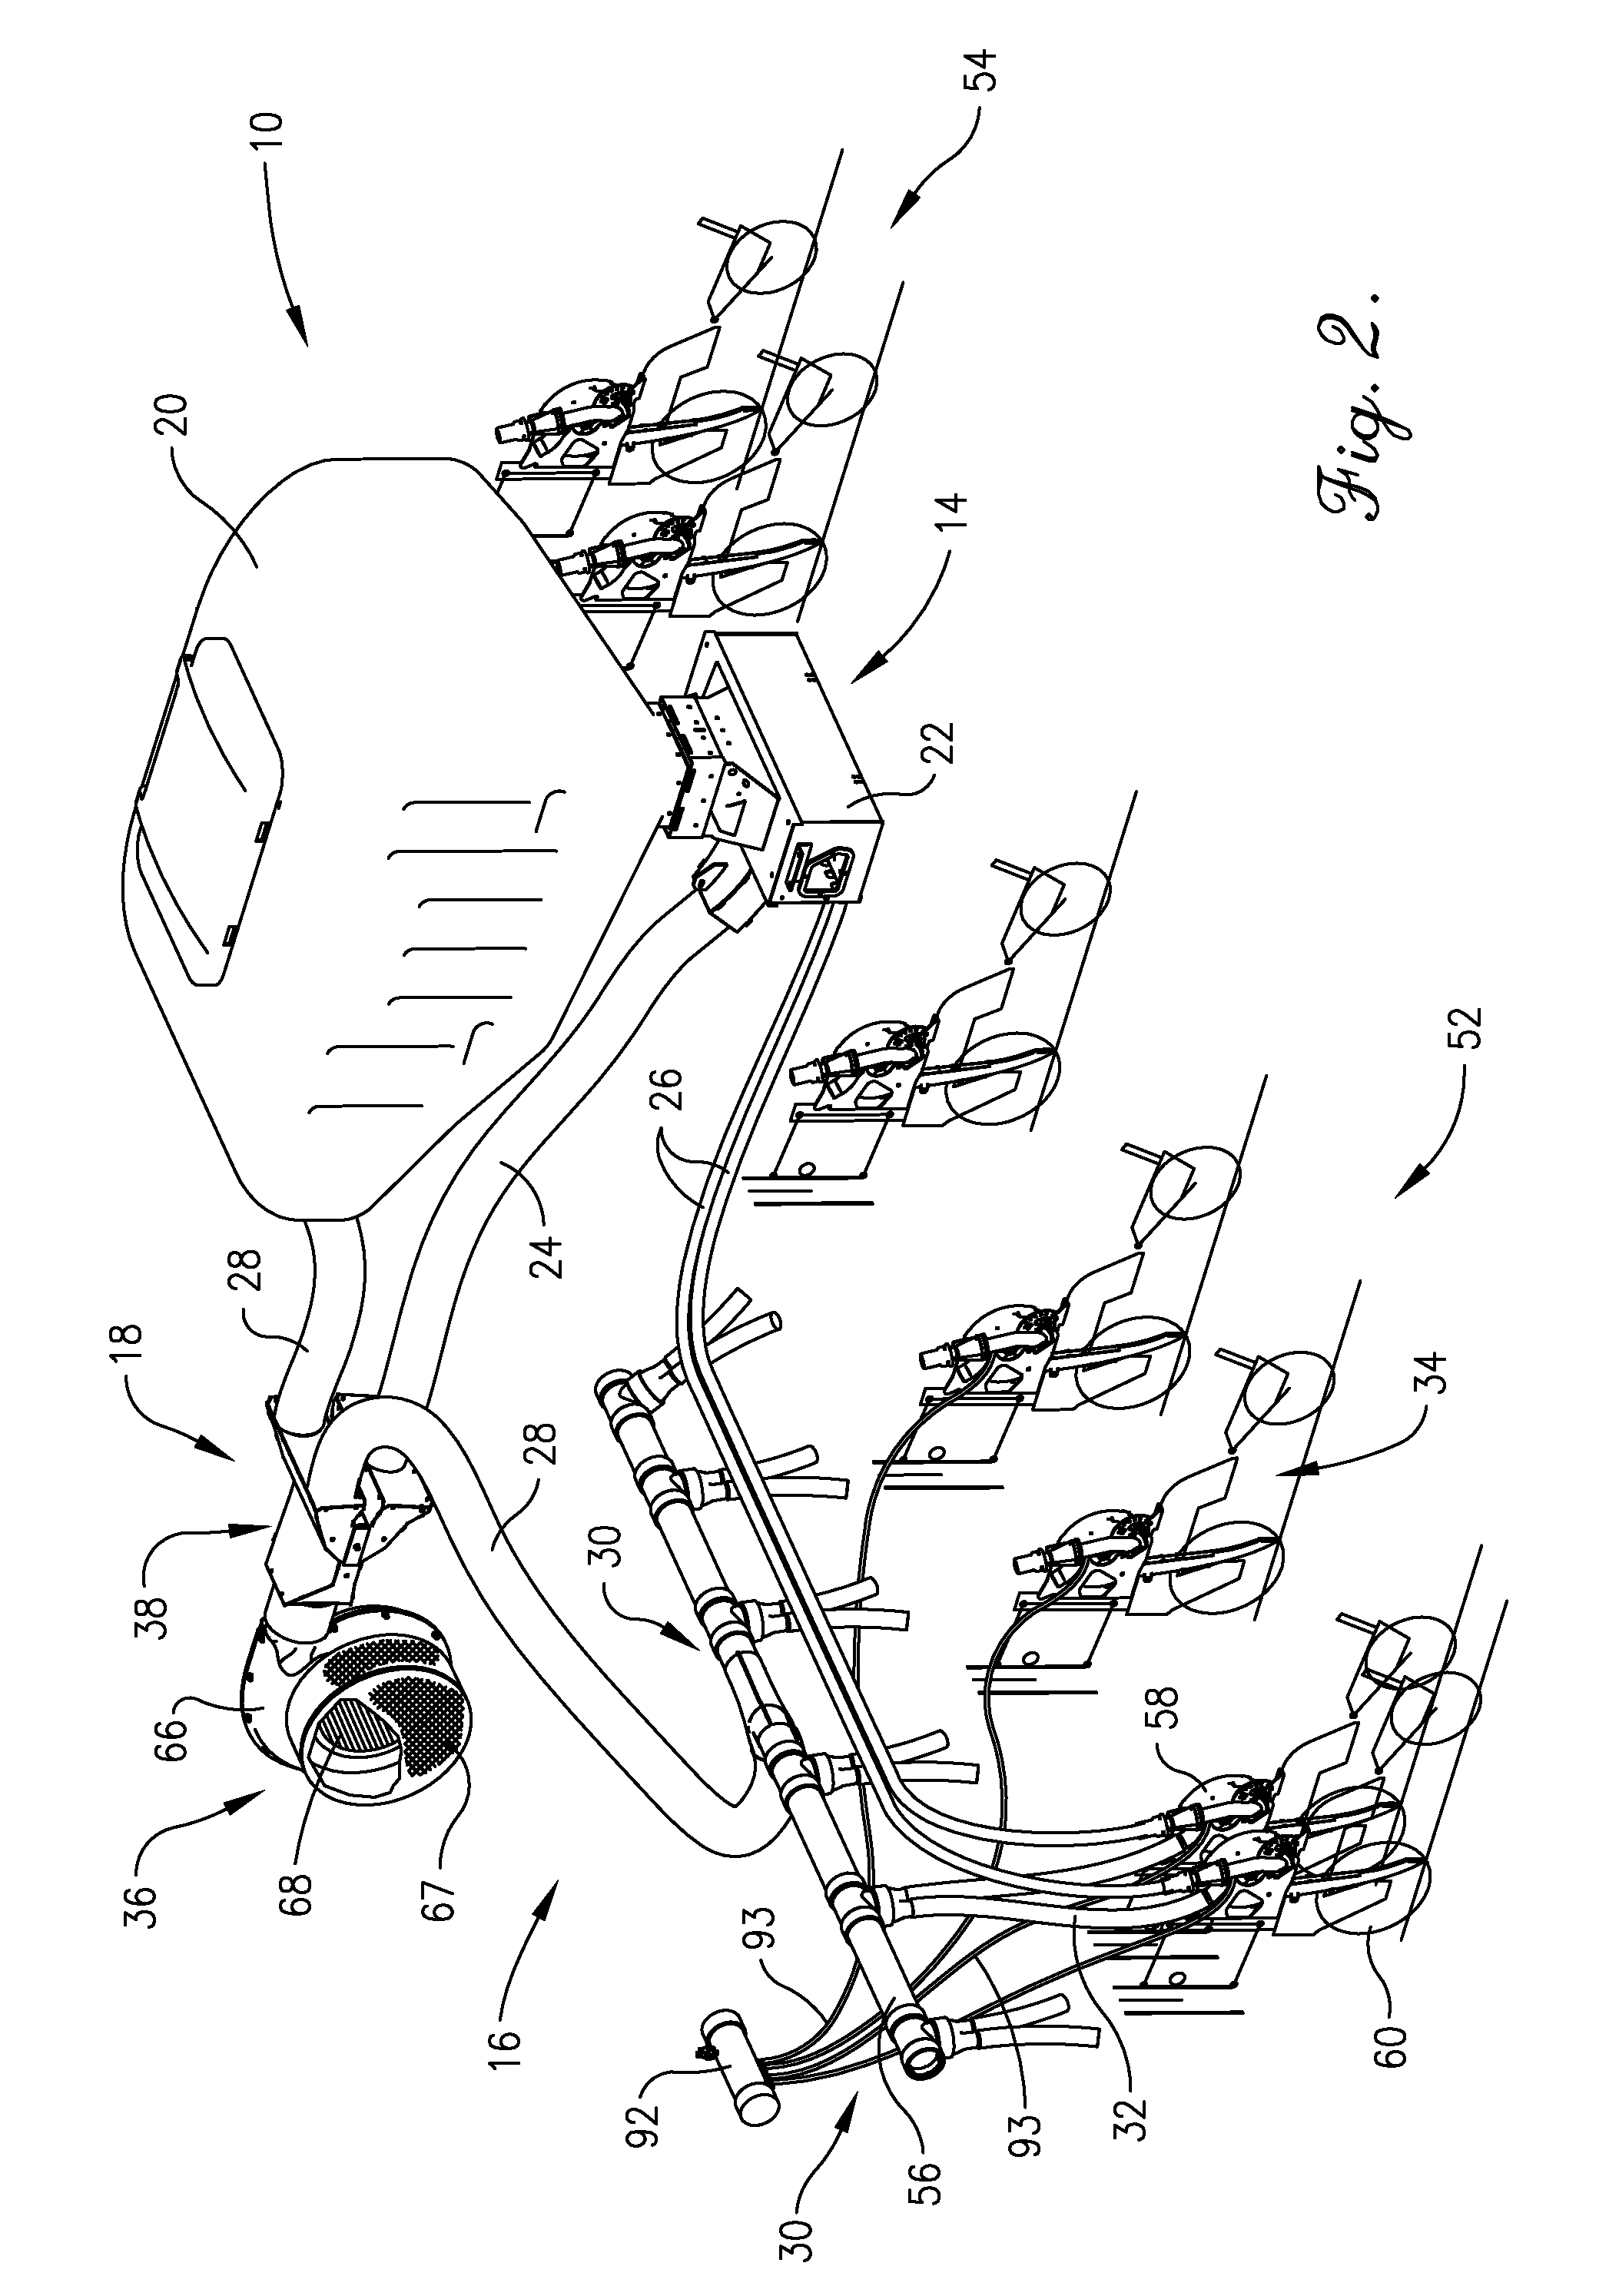 Air-assisted planting system having a single fan with pressure-responsive splitting of air streams for conveying and metering functions